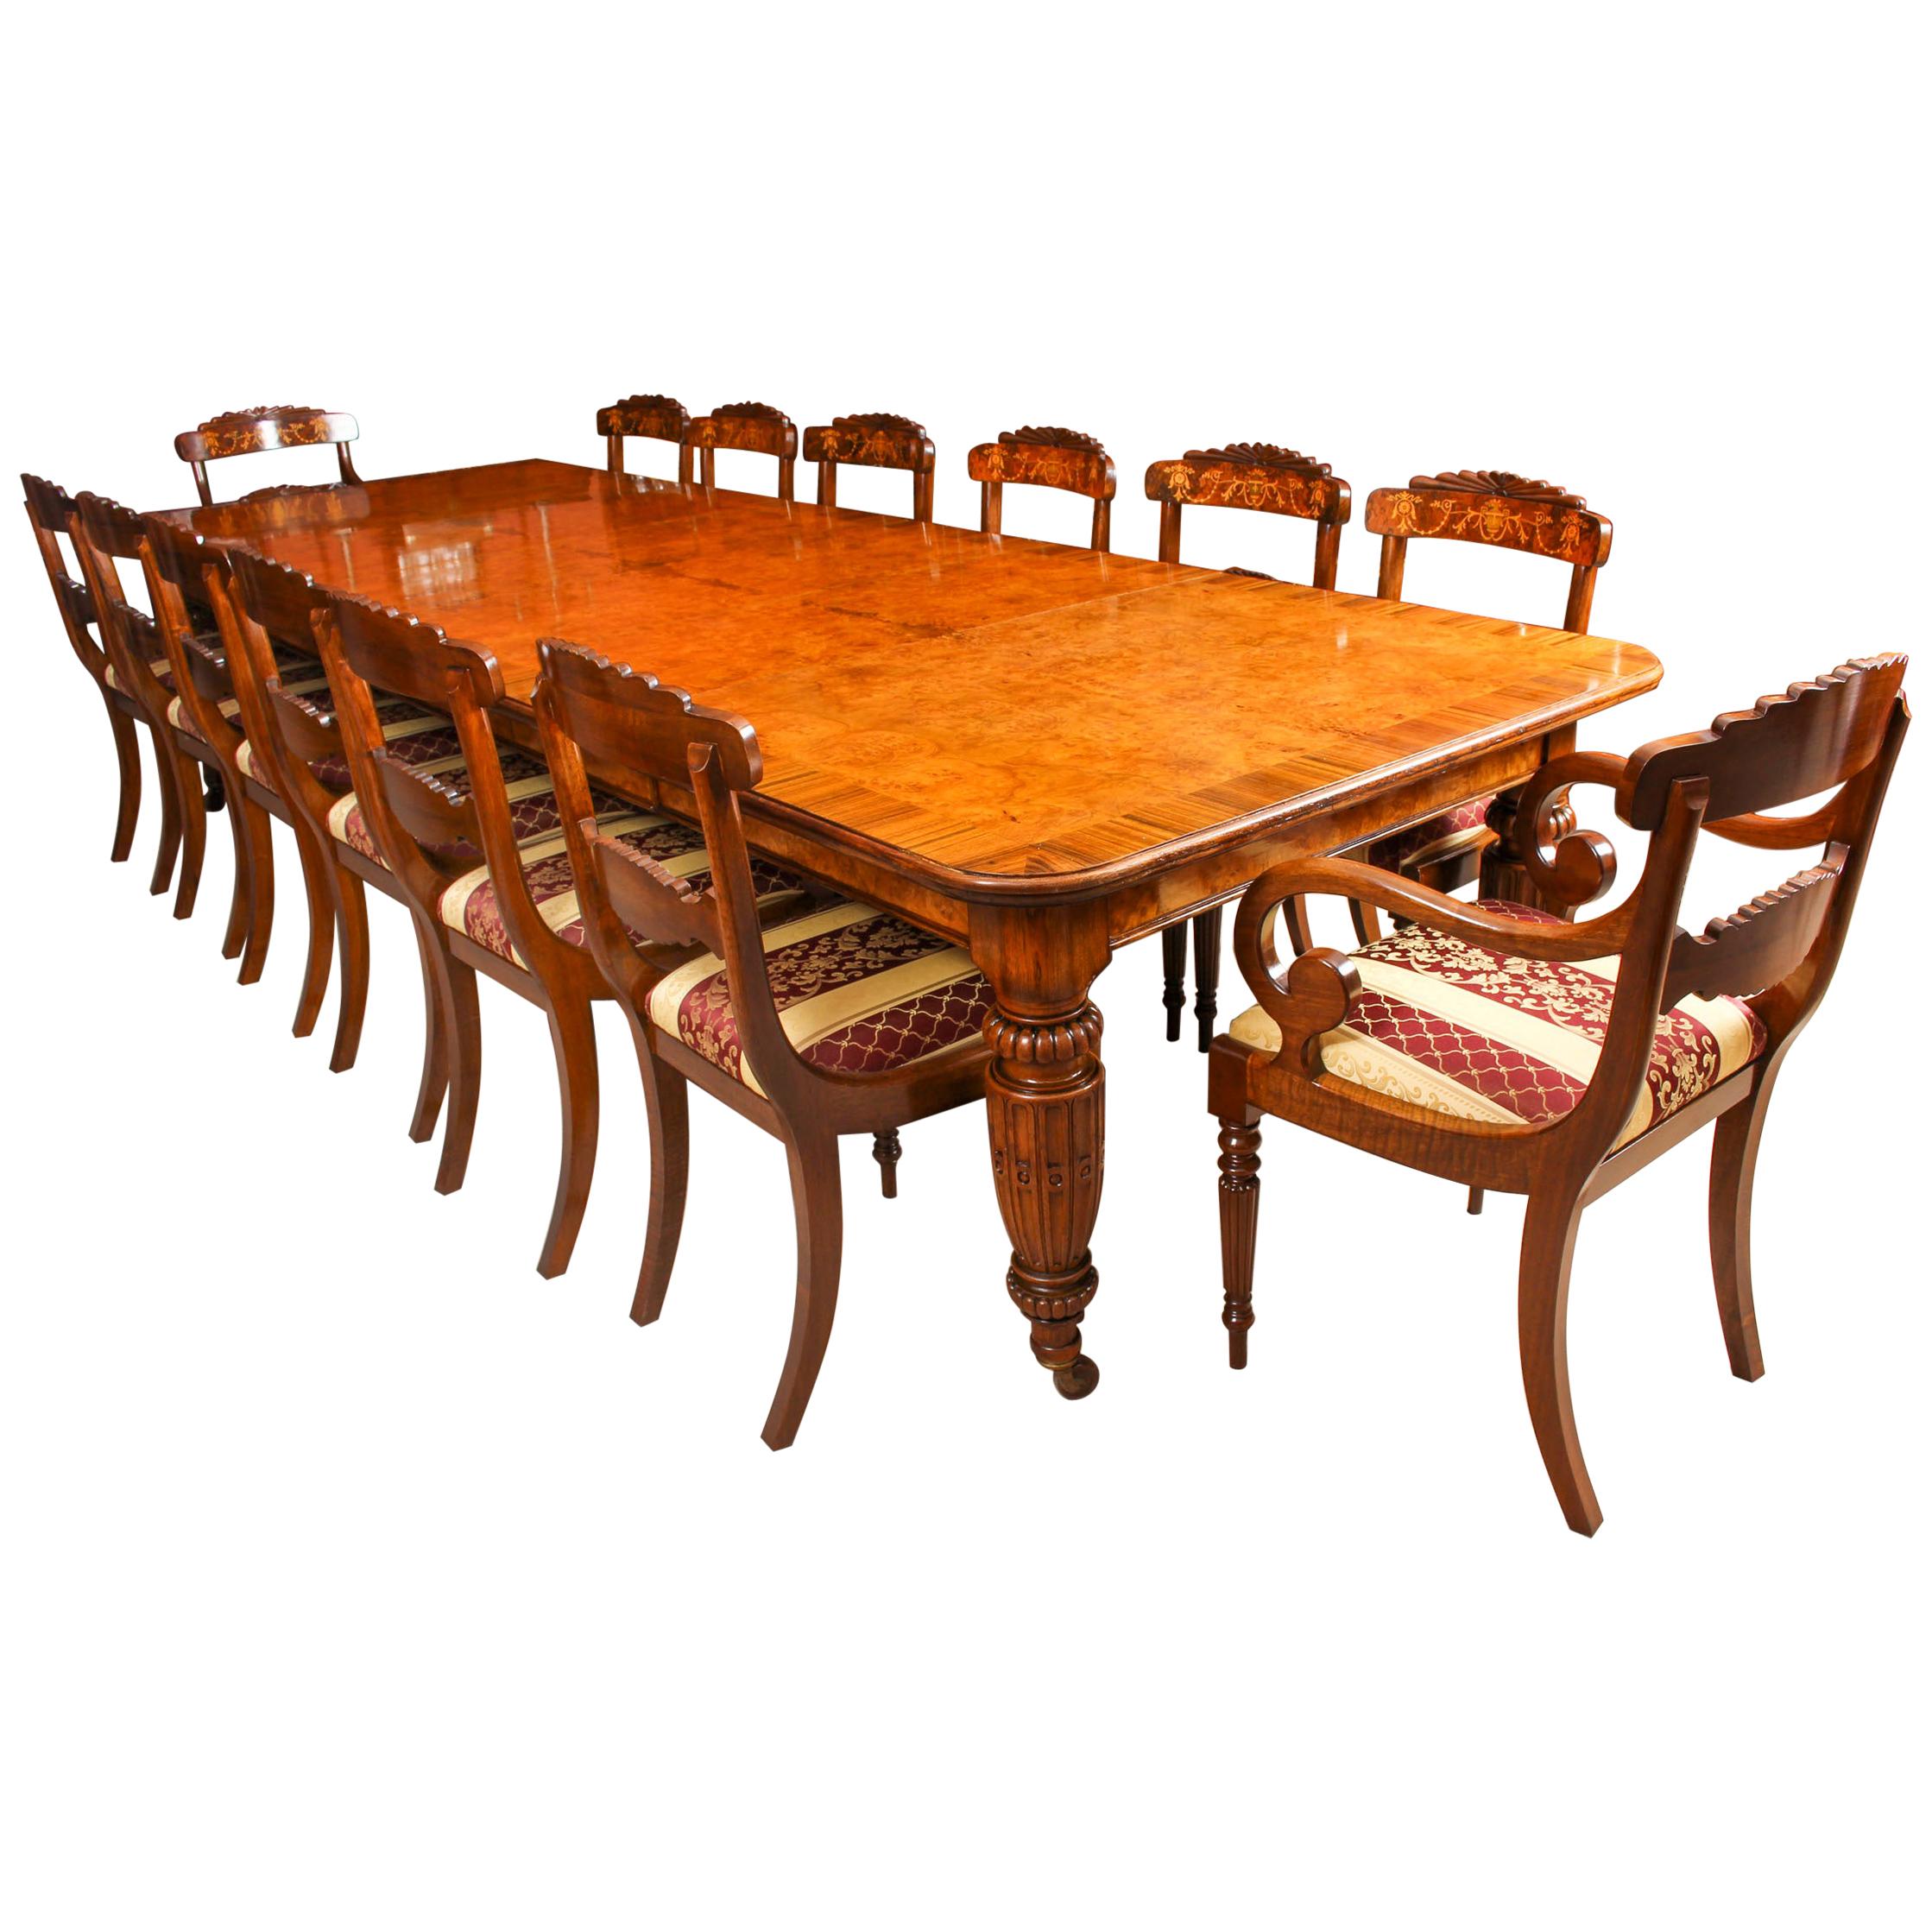 Antique Pollard Oak Victorian Extending Dining Table 19th Century & 12 Chairs